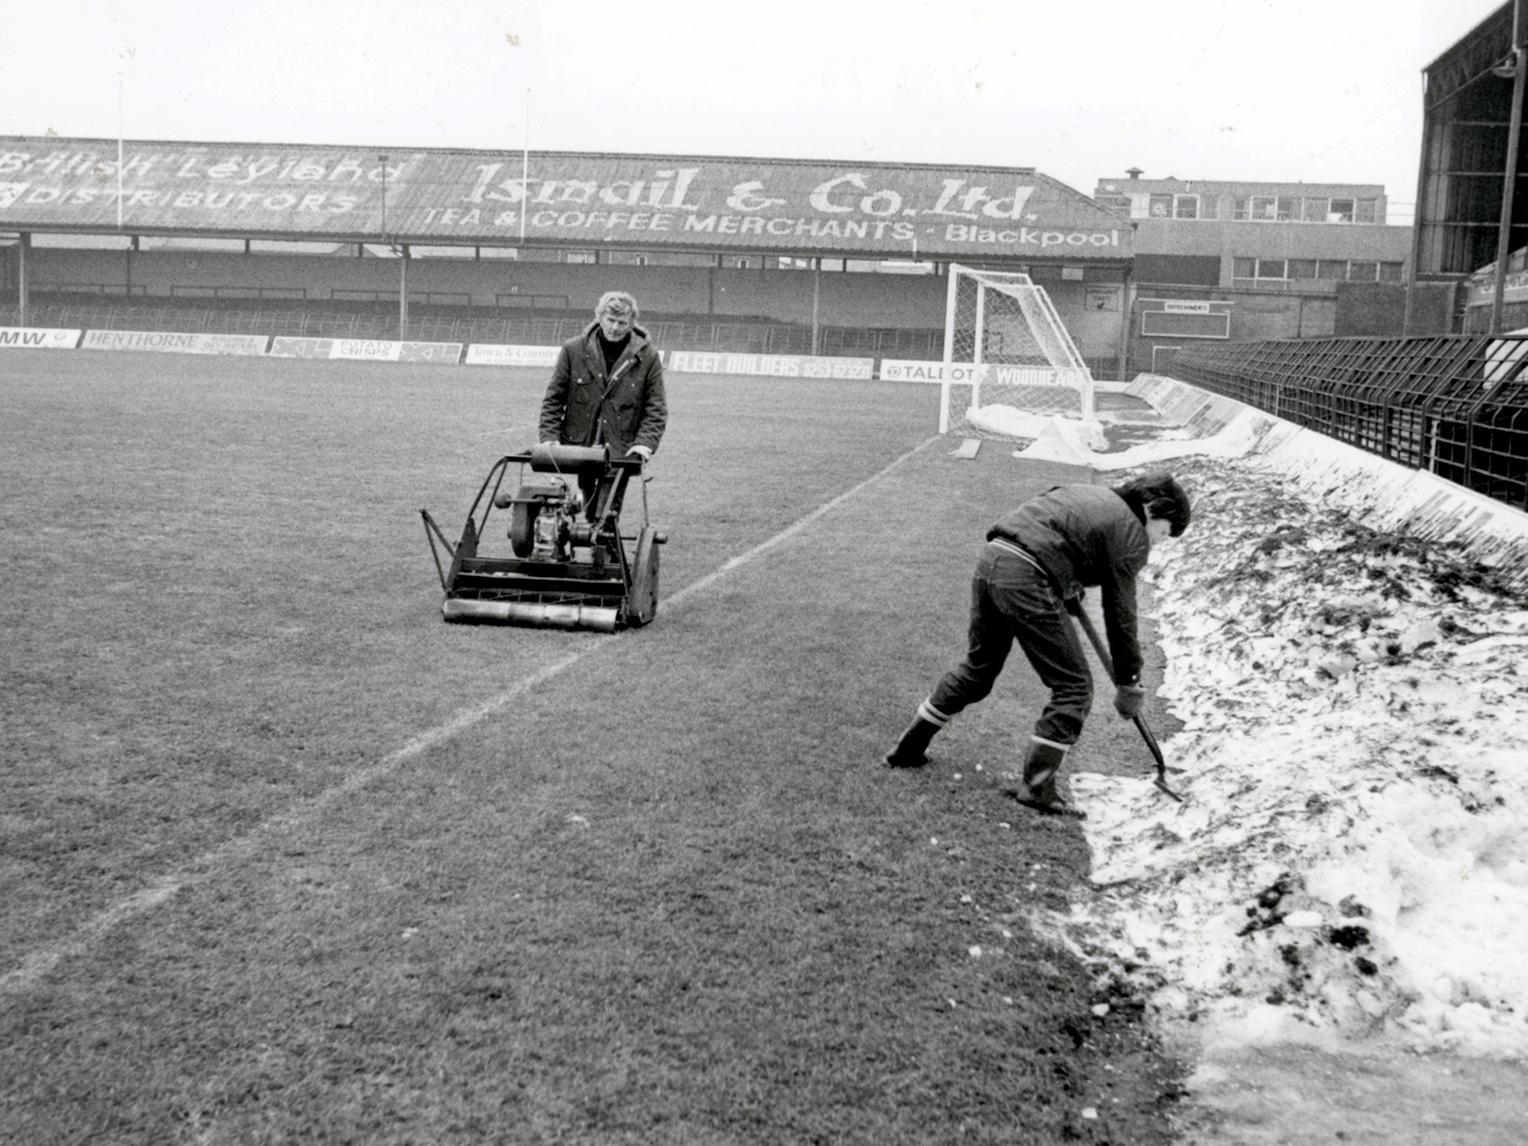 The remaining drifts of snow are cleared away from the surrounding track on Decemebr 30 1981. Blackpool FC and groundsman Cyril Robinson gives the grass a trim at Bloomfield Road.